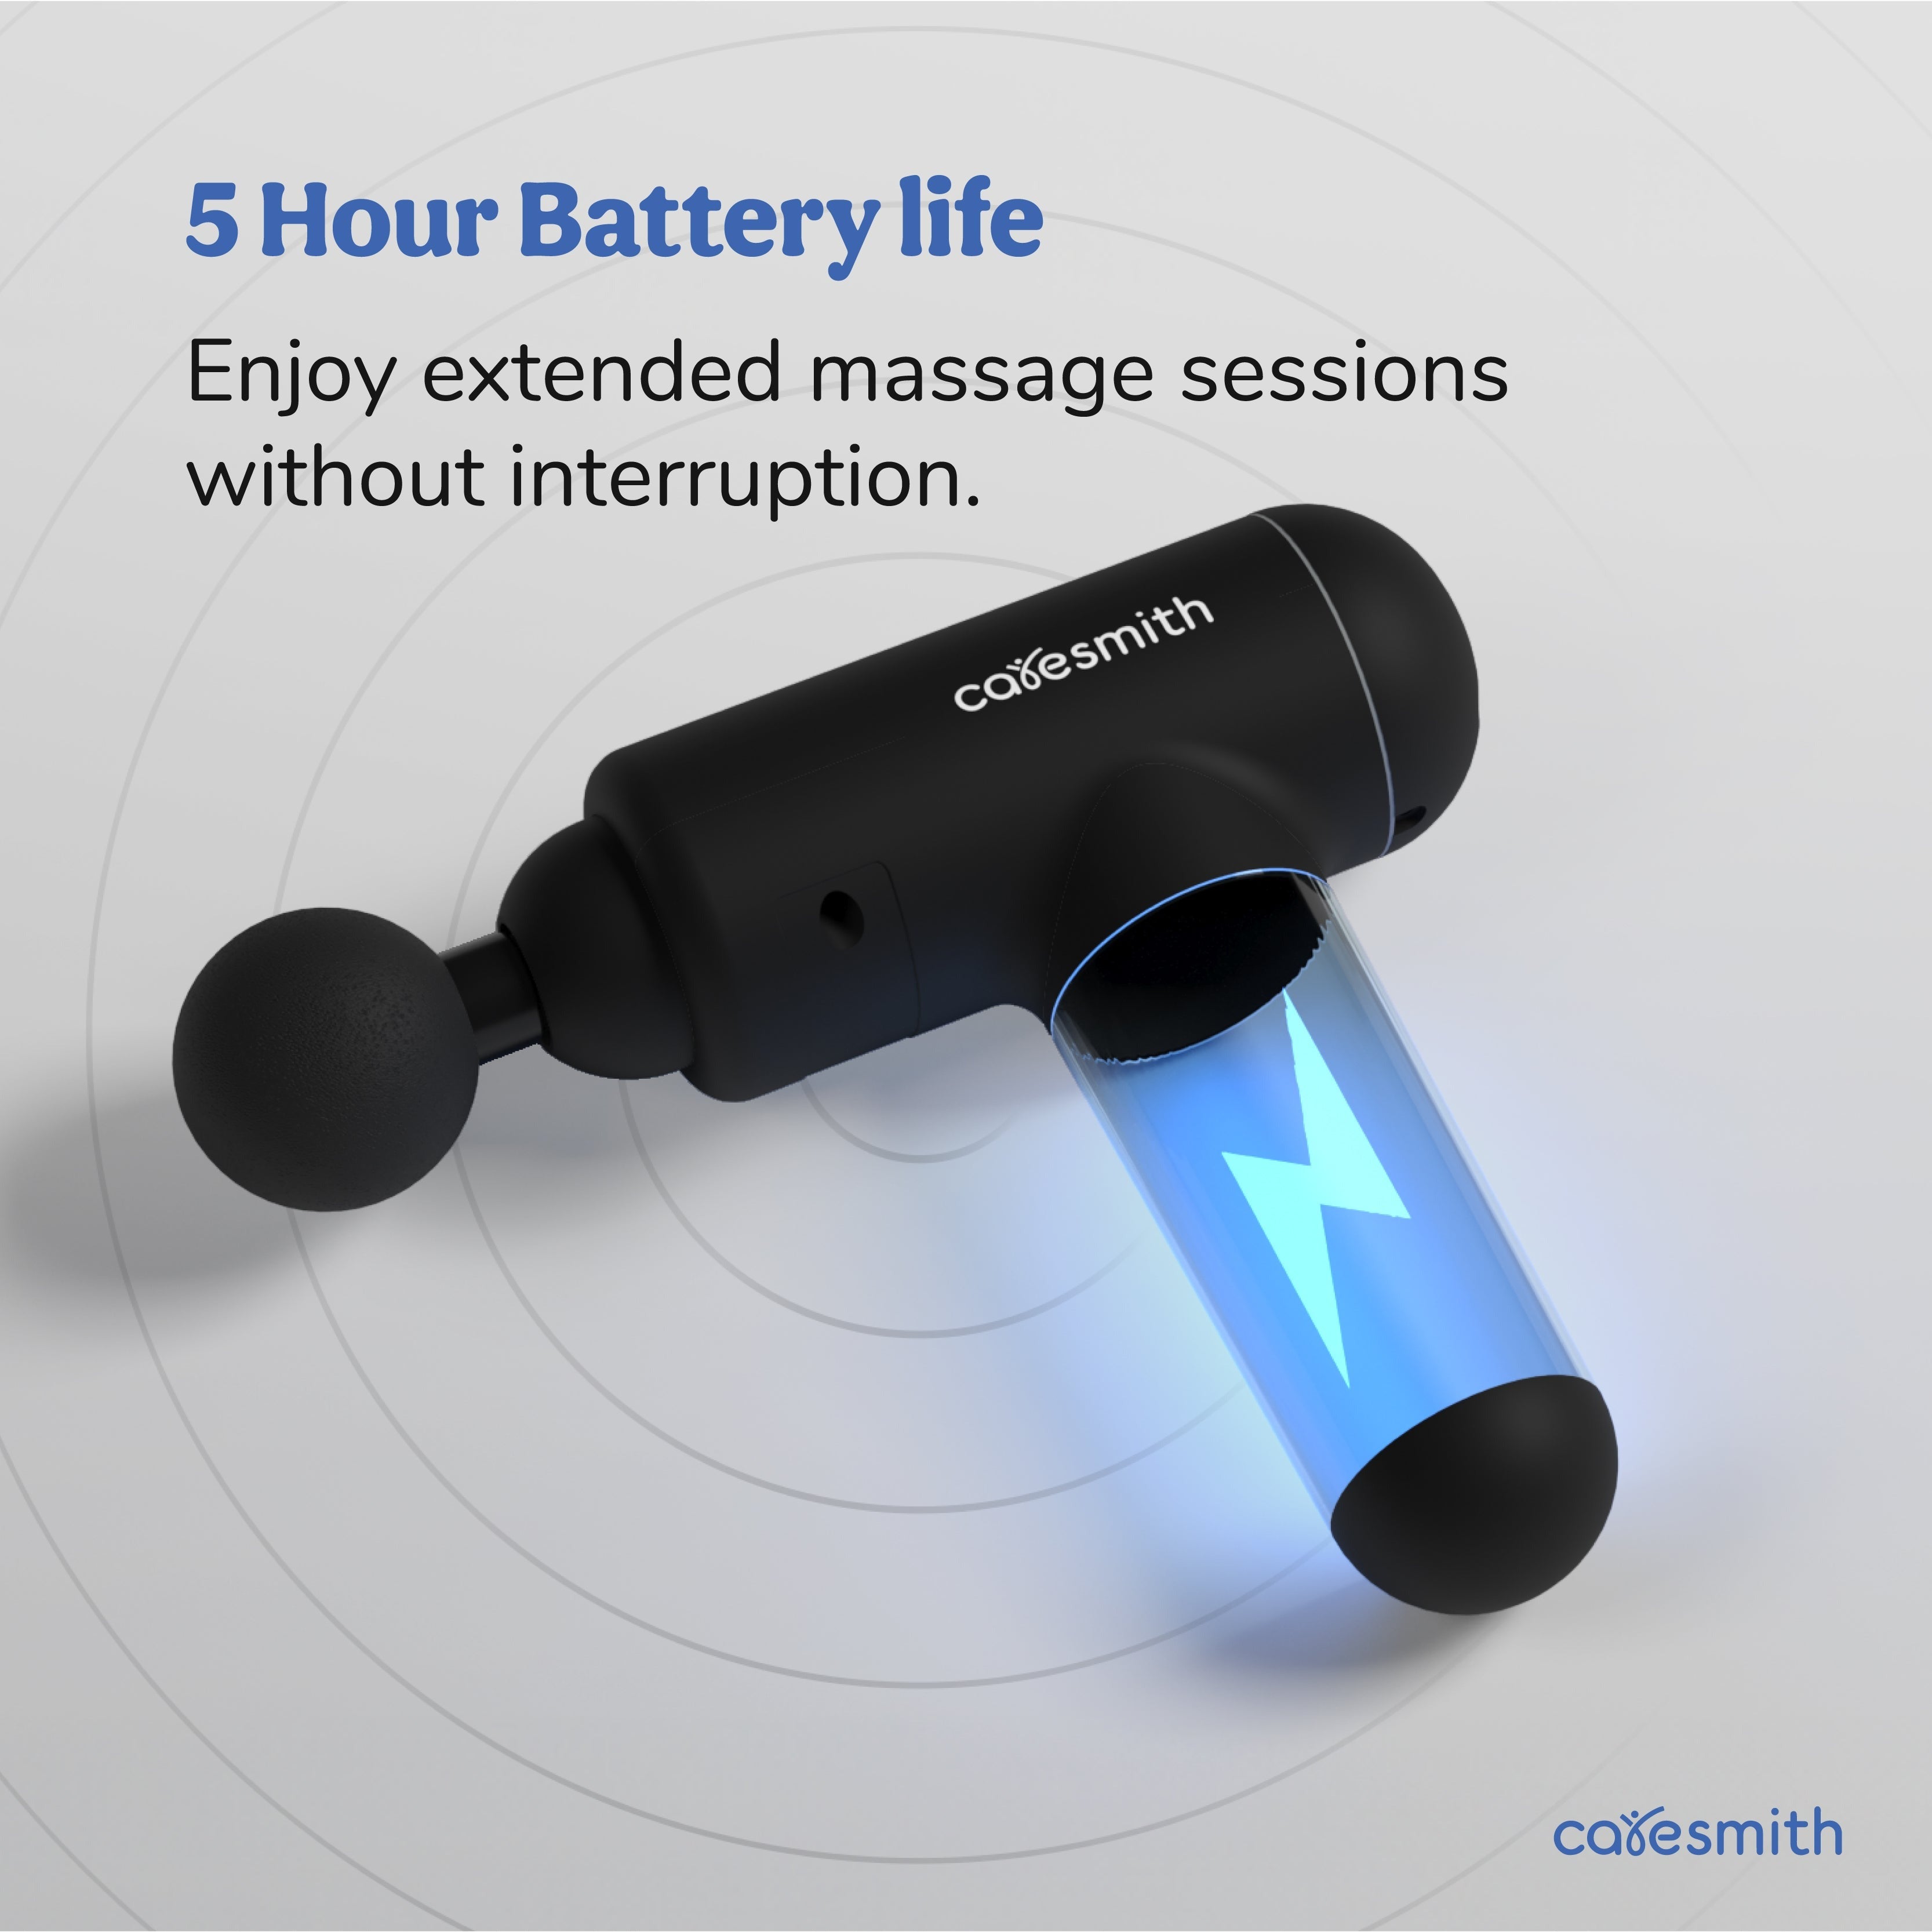 Caresmith Charge Boost Massage Gun with Long Battery Life